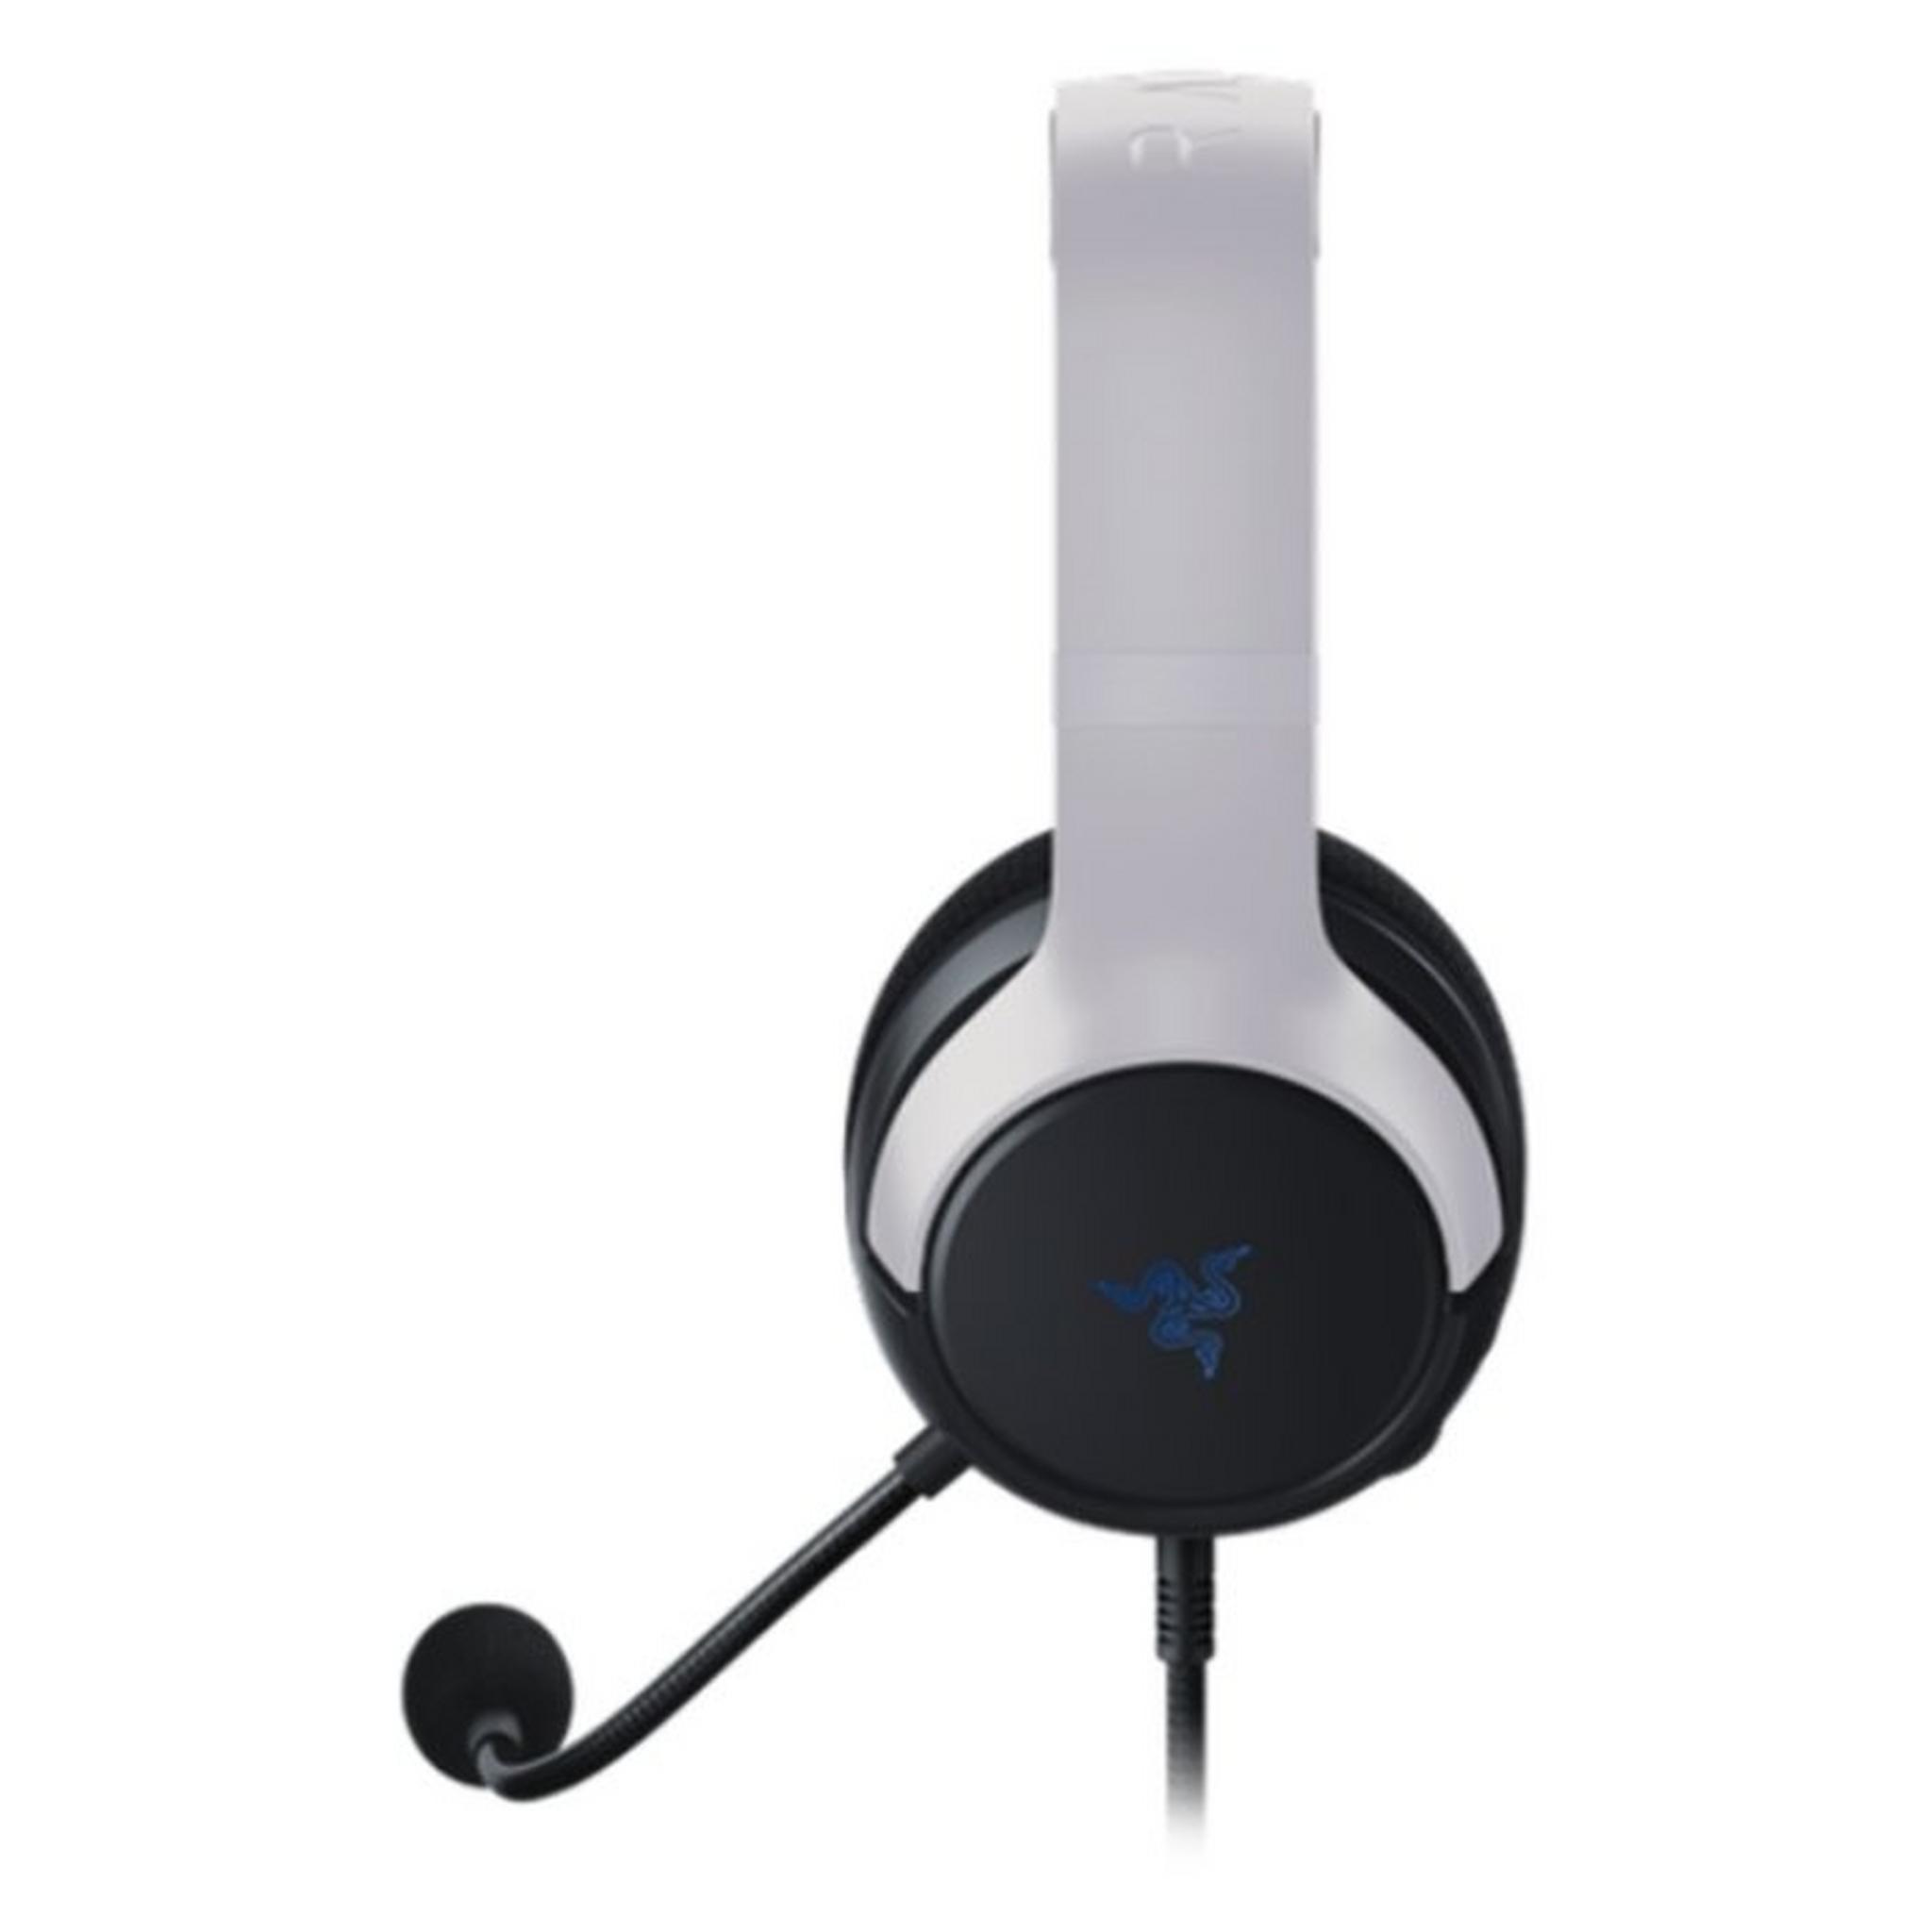 Razer Kaira Pro RGB Wired Gaming Headset for PlayStation